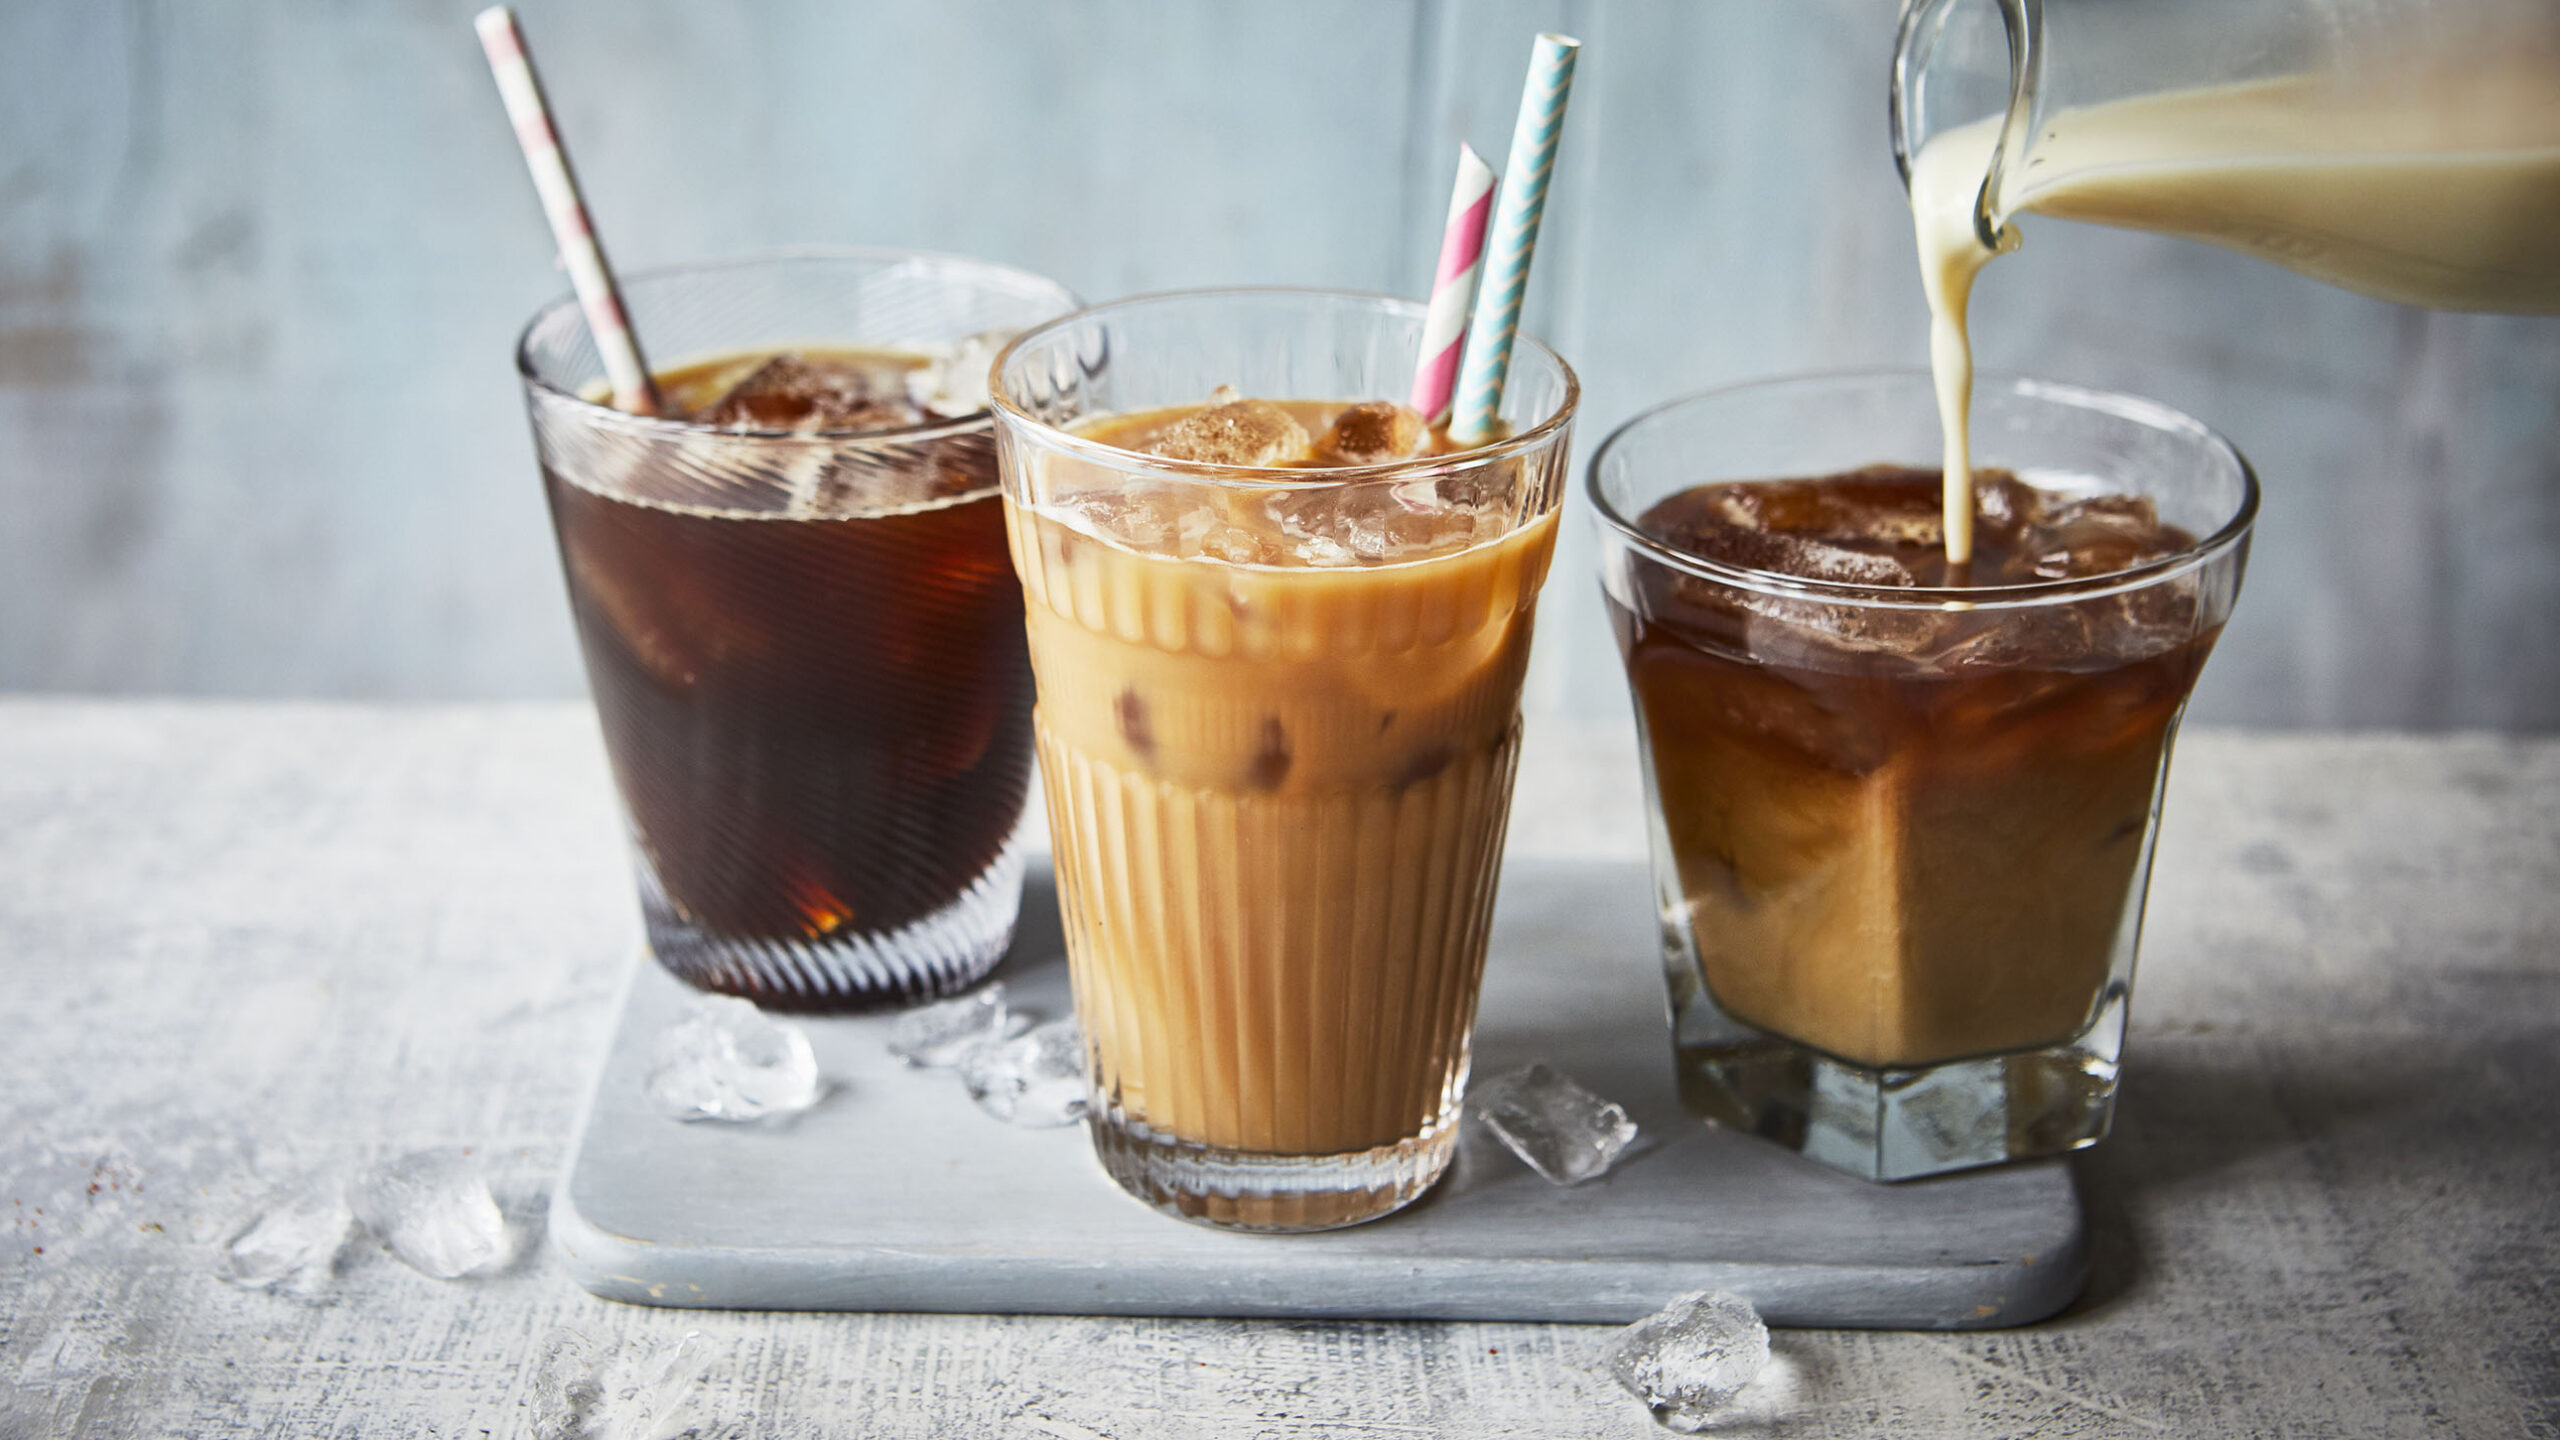 How do you store iced drinks?